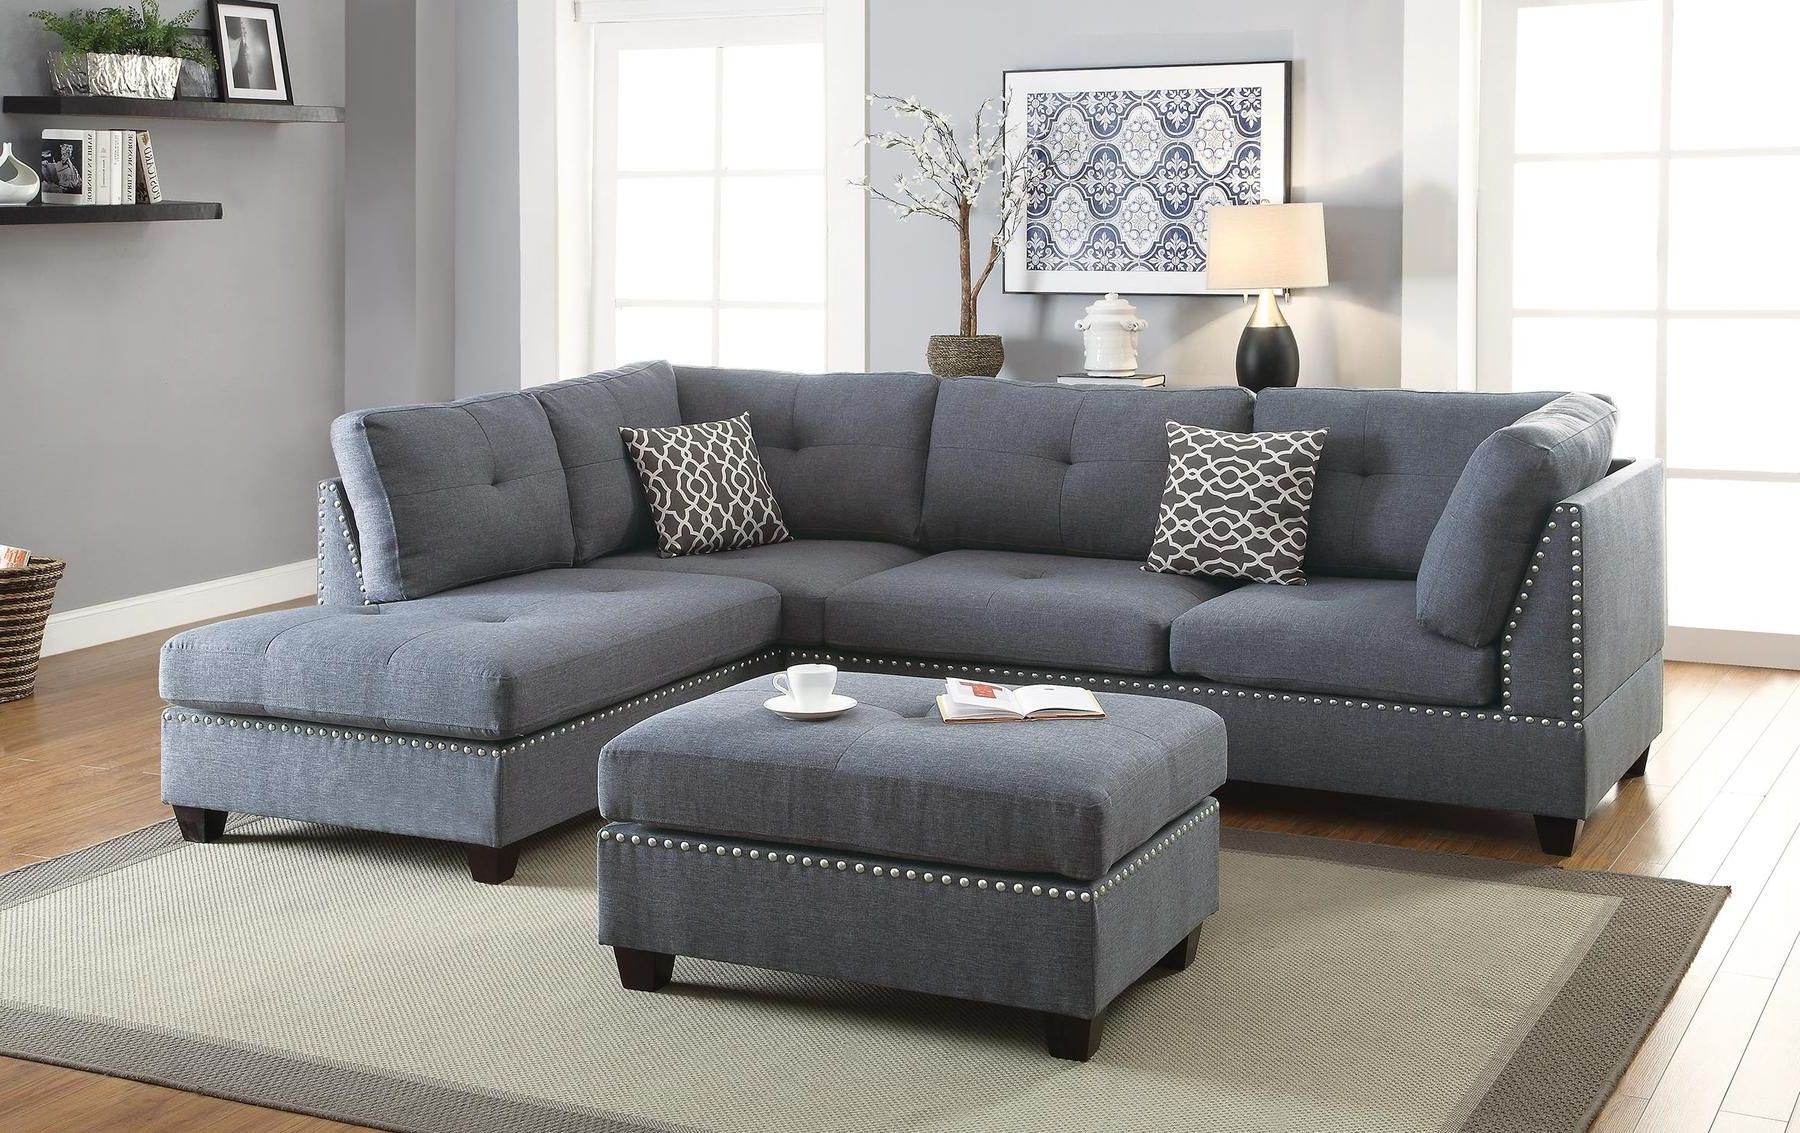 Preferred P6975 Sectional Sofa + Ottoman F6975 Poundex Sectional Sofas (View 9 of 10)